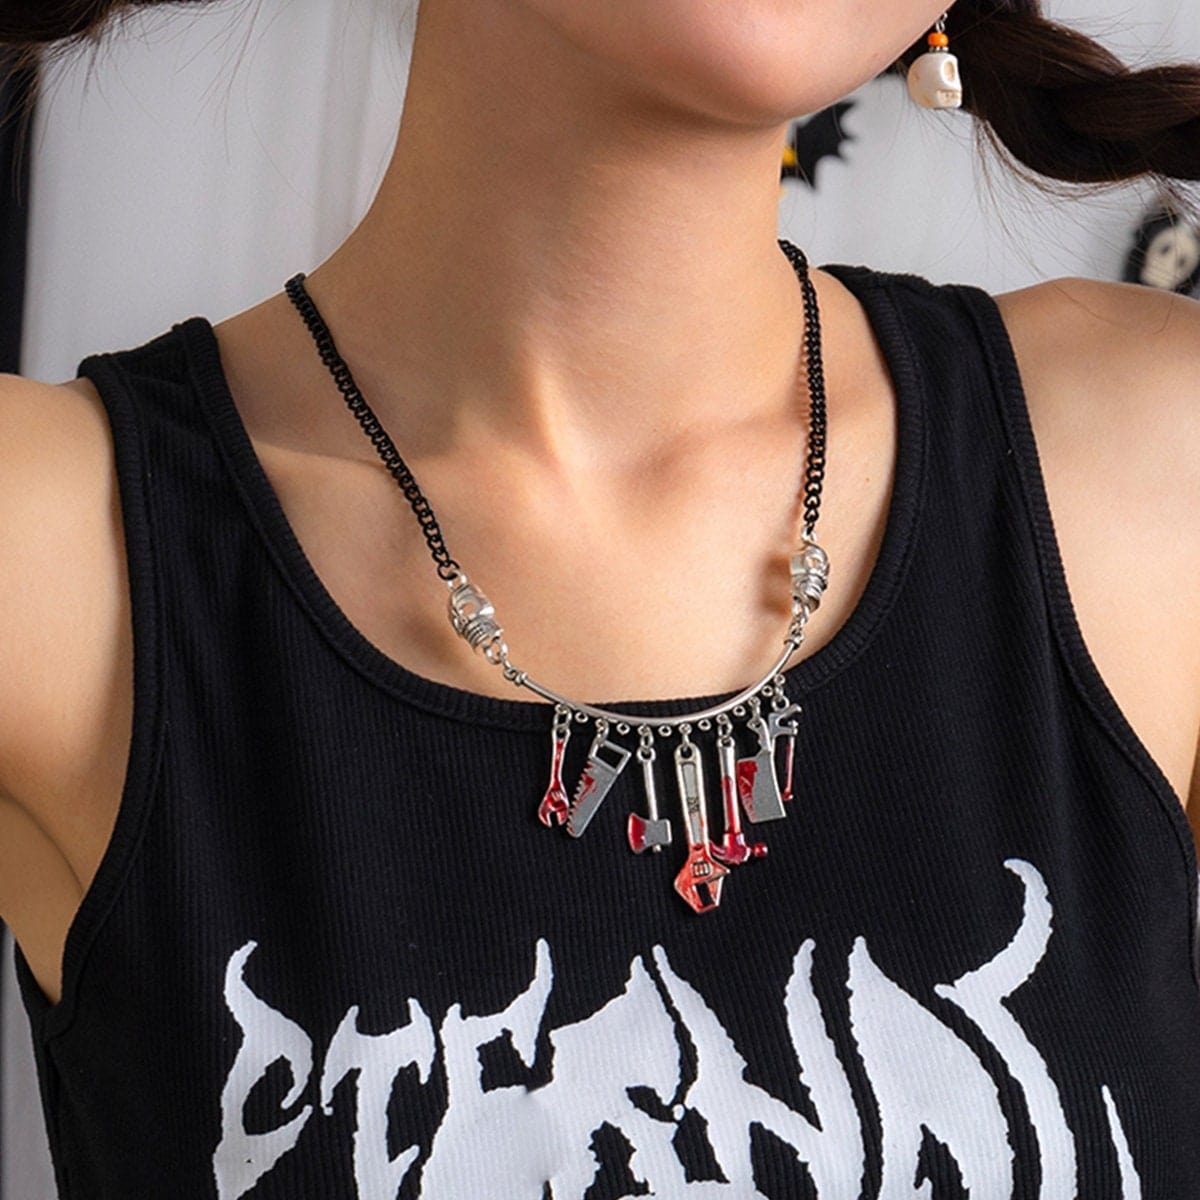 Chic Bloody Tool Skull Charm Curb Chain Choker Necklace